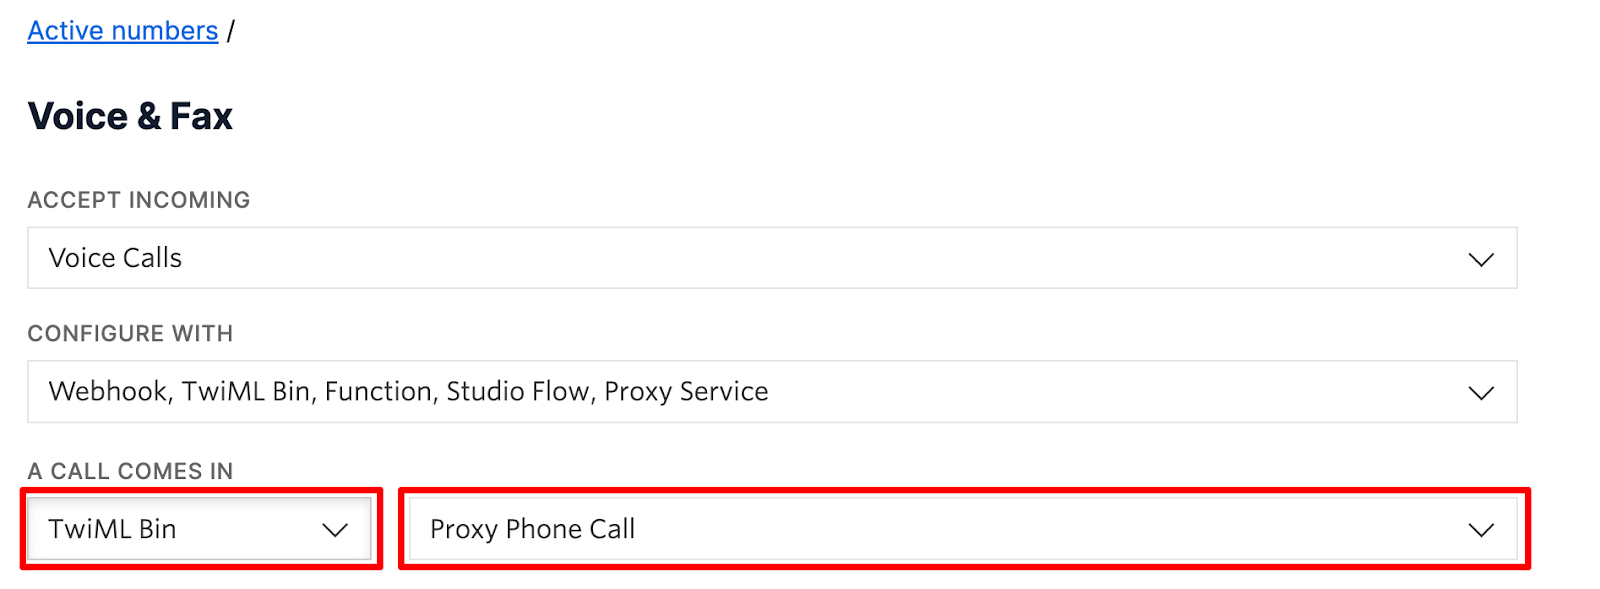 Configure Twilio Phone Number to respond with the "Proxy Phone Call" TwiML bin when a call comes in